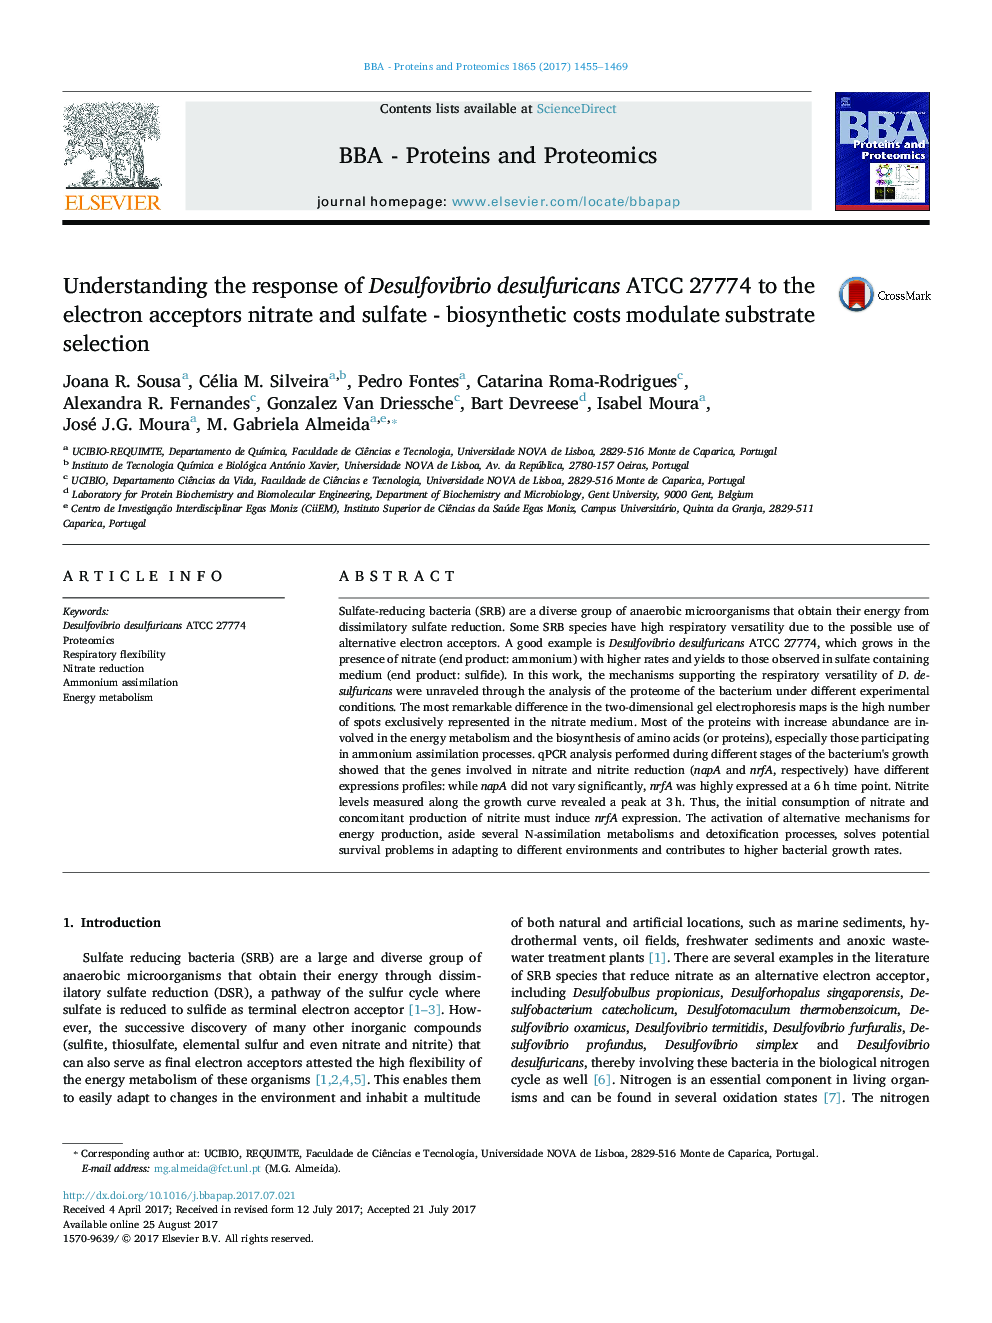 Understanding the response of Desulfovibrio desulfuricans ATCC 27774 to the electron acceptors nitrate and sulfate - biosynthetic costs modulate substrate selection